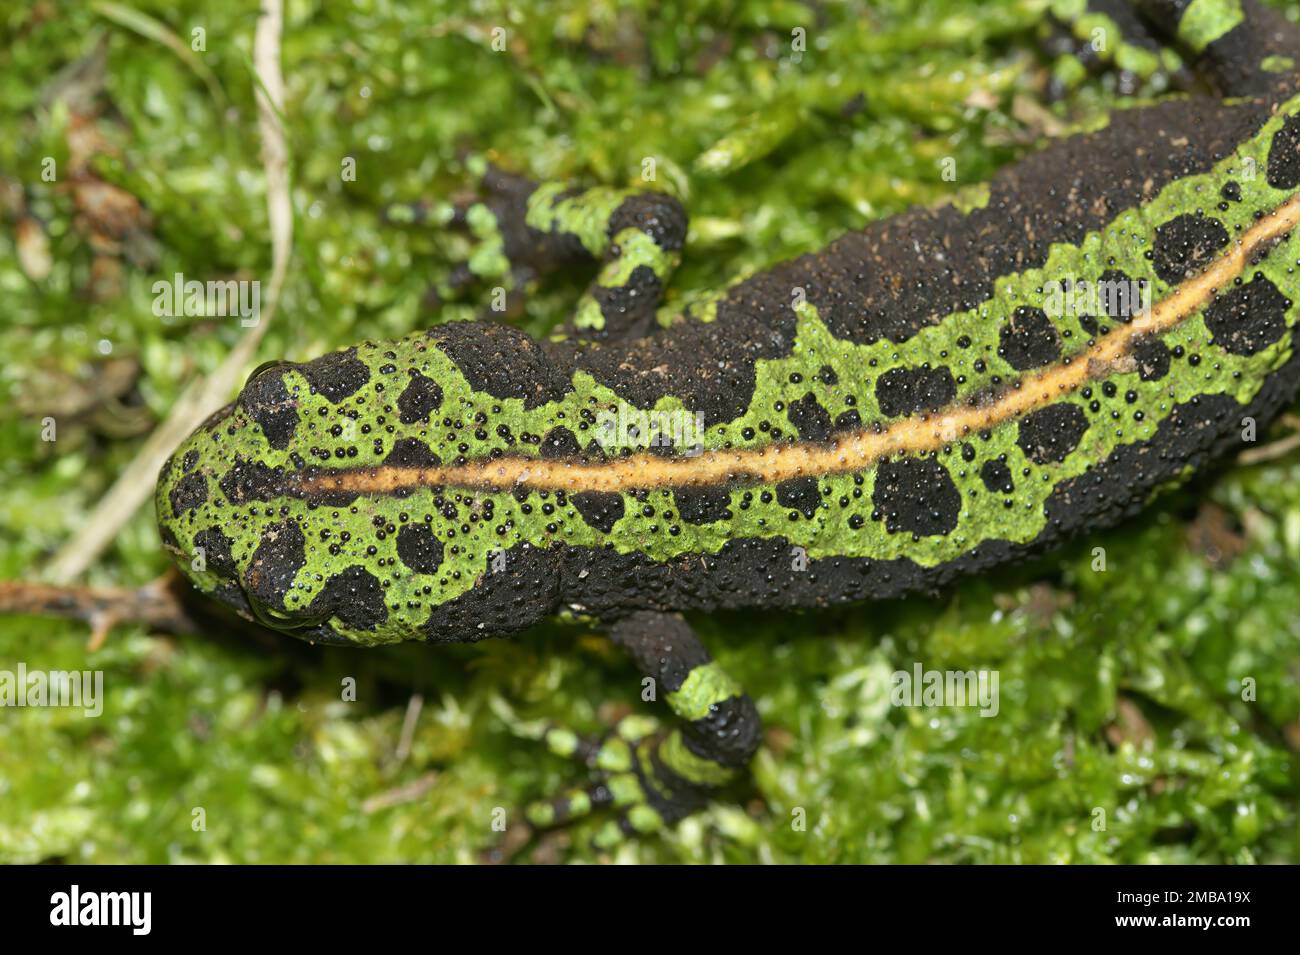 Dorsal detailed closeup on the colorful endangered green European marbled newt, Triturus marmoratus sitting on moss Stock Photo